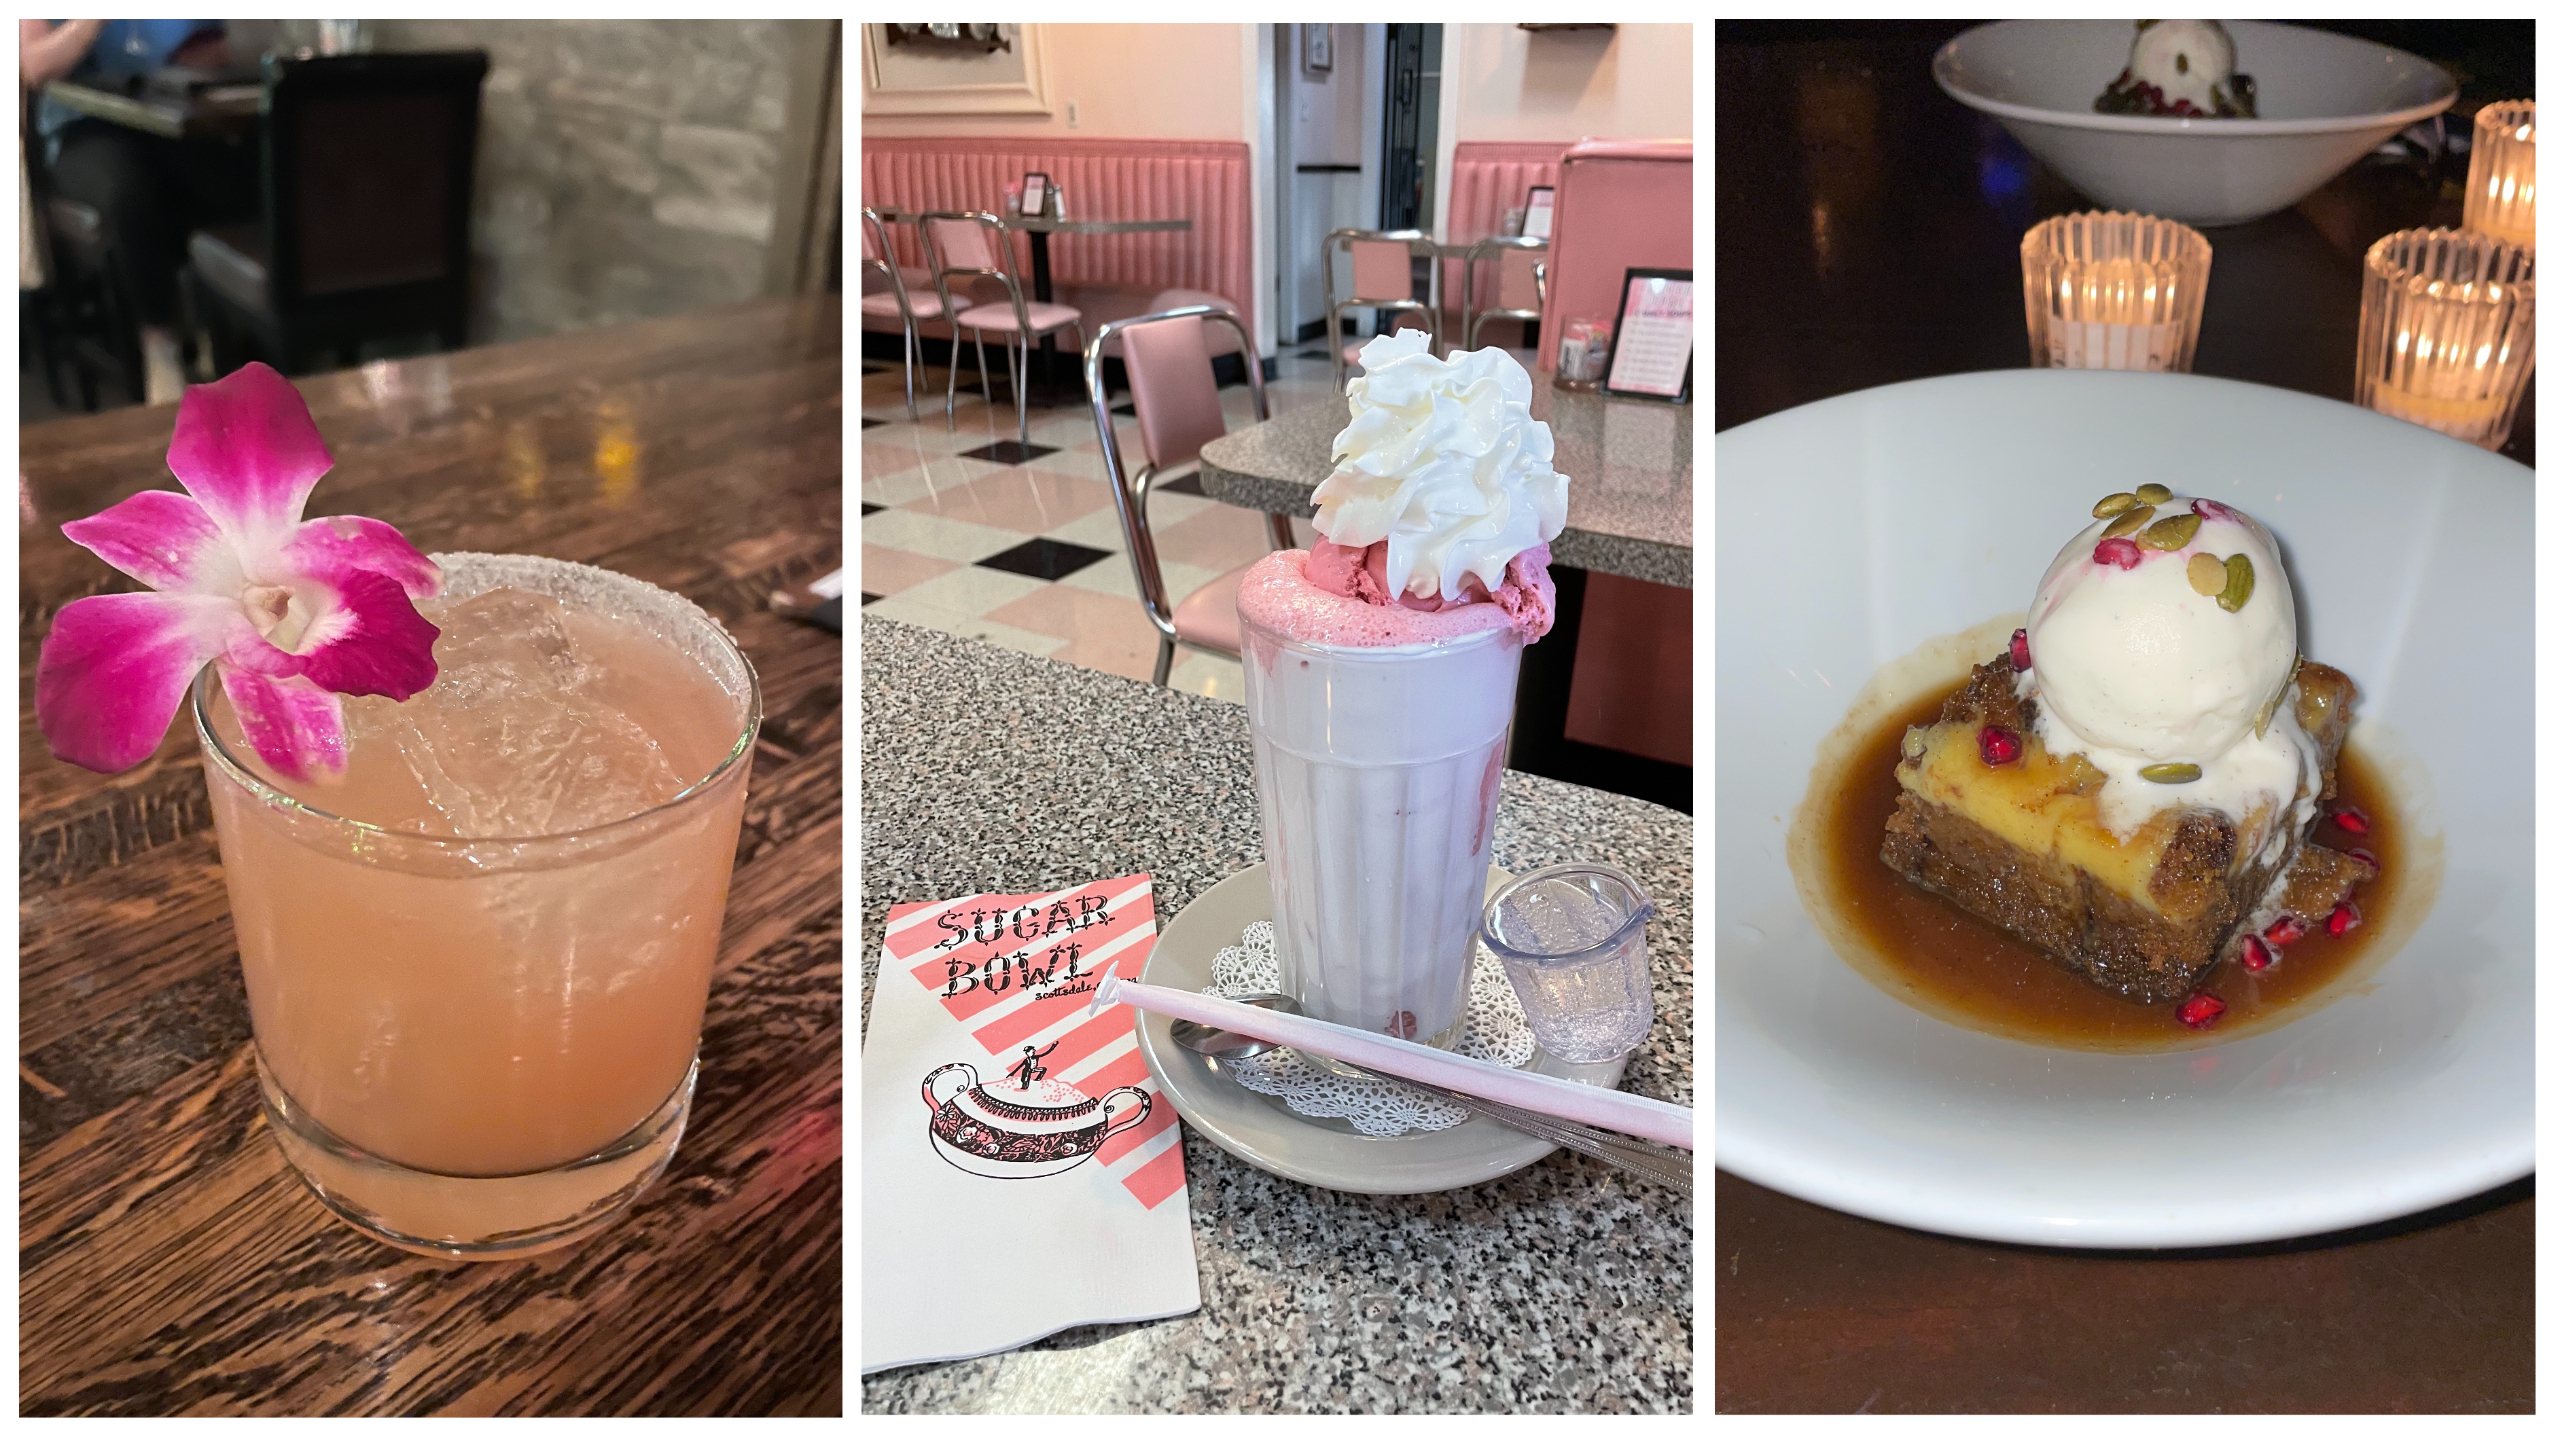 From left to right: A cocktail at Second Story Liquor Bar, strawberry treat at Sugar Bowl and pumpkin bread pudding at The Mission.